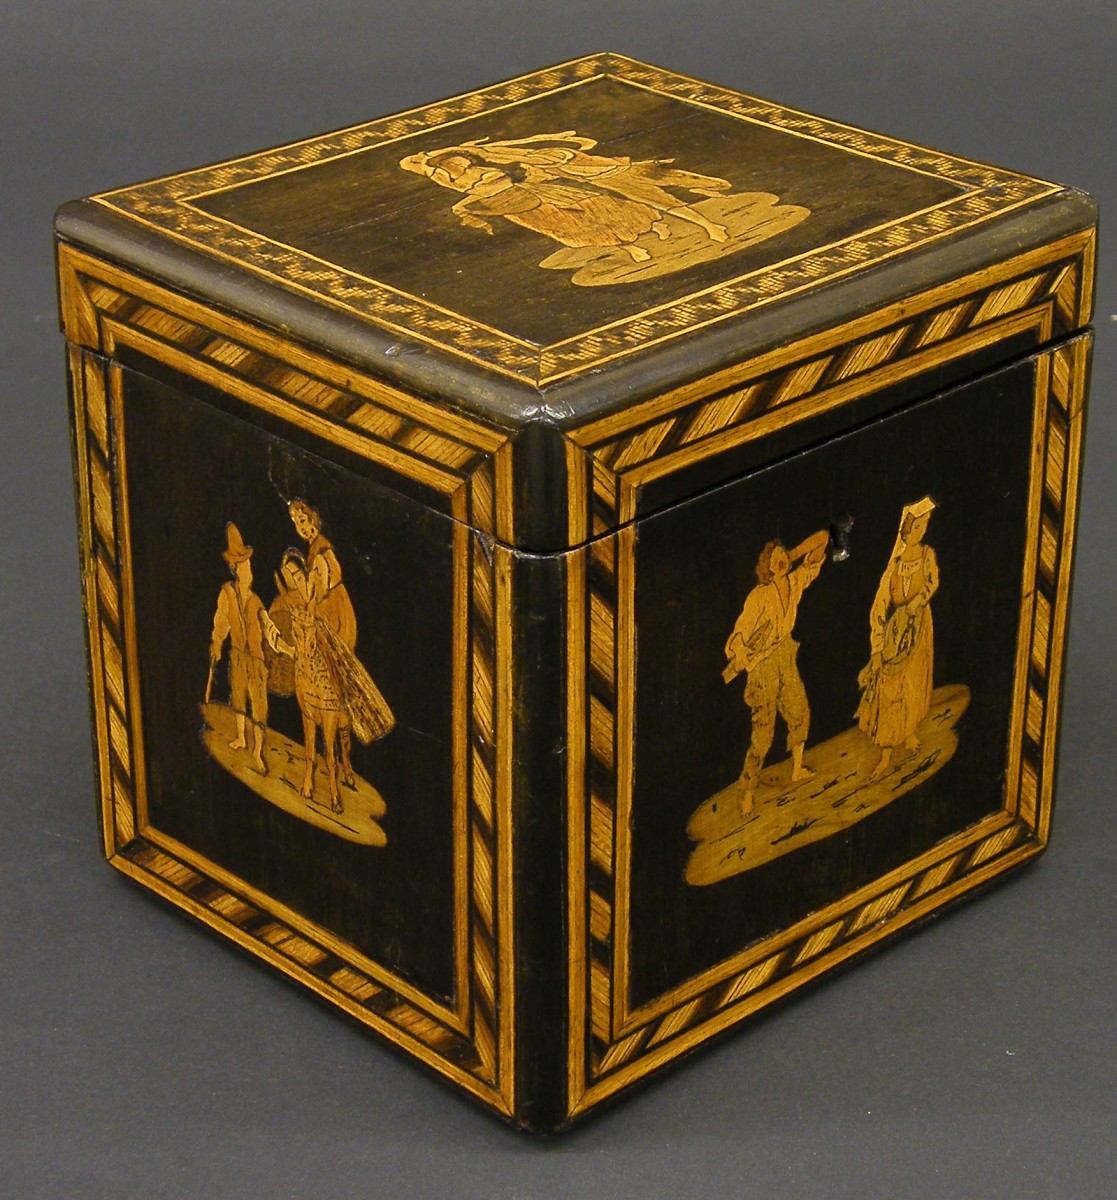 Attractive 19th century Sorrento square tea caddy, inlaid with panels of romantic scenes amidst rope